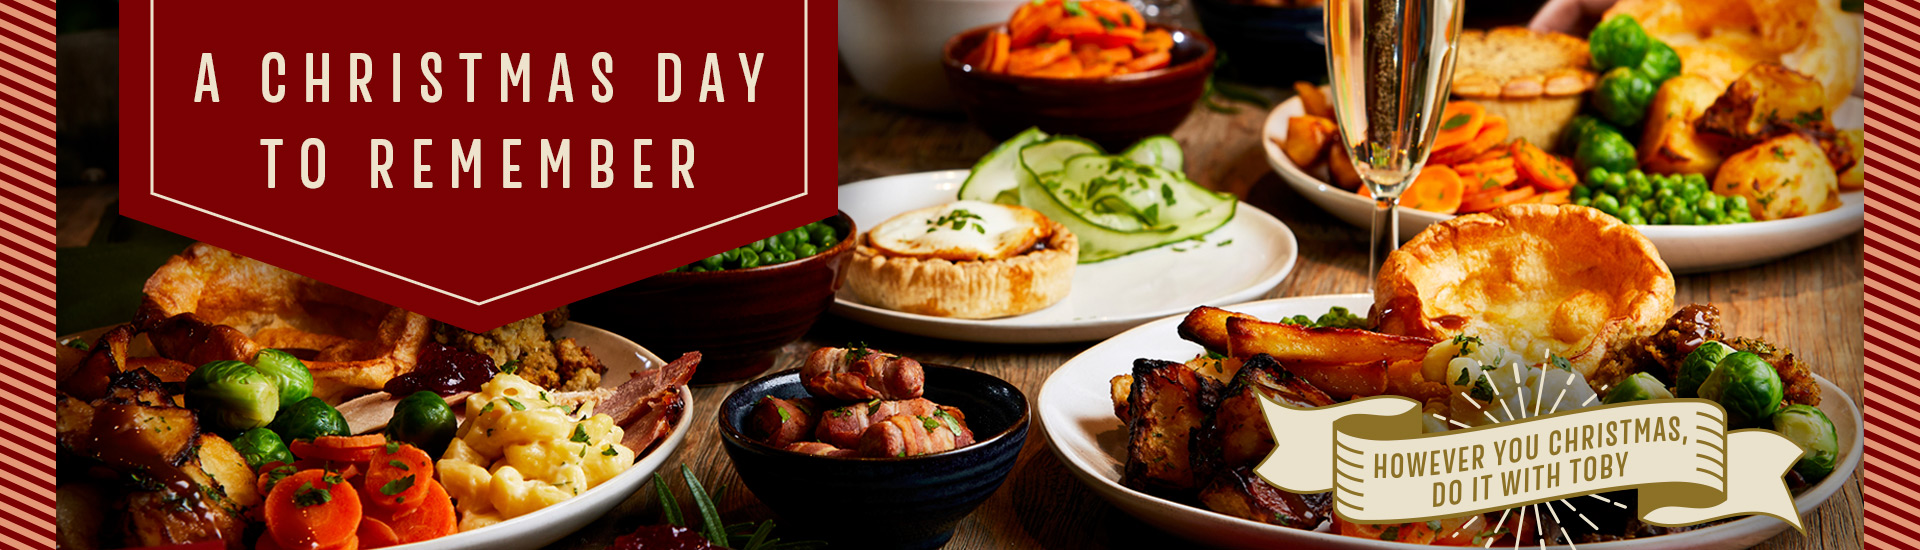 Christmas Day menu at Toby Carvery Moby Dick